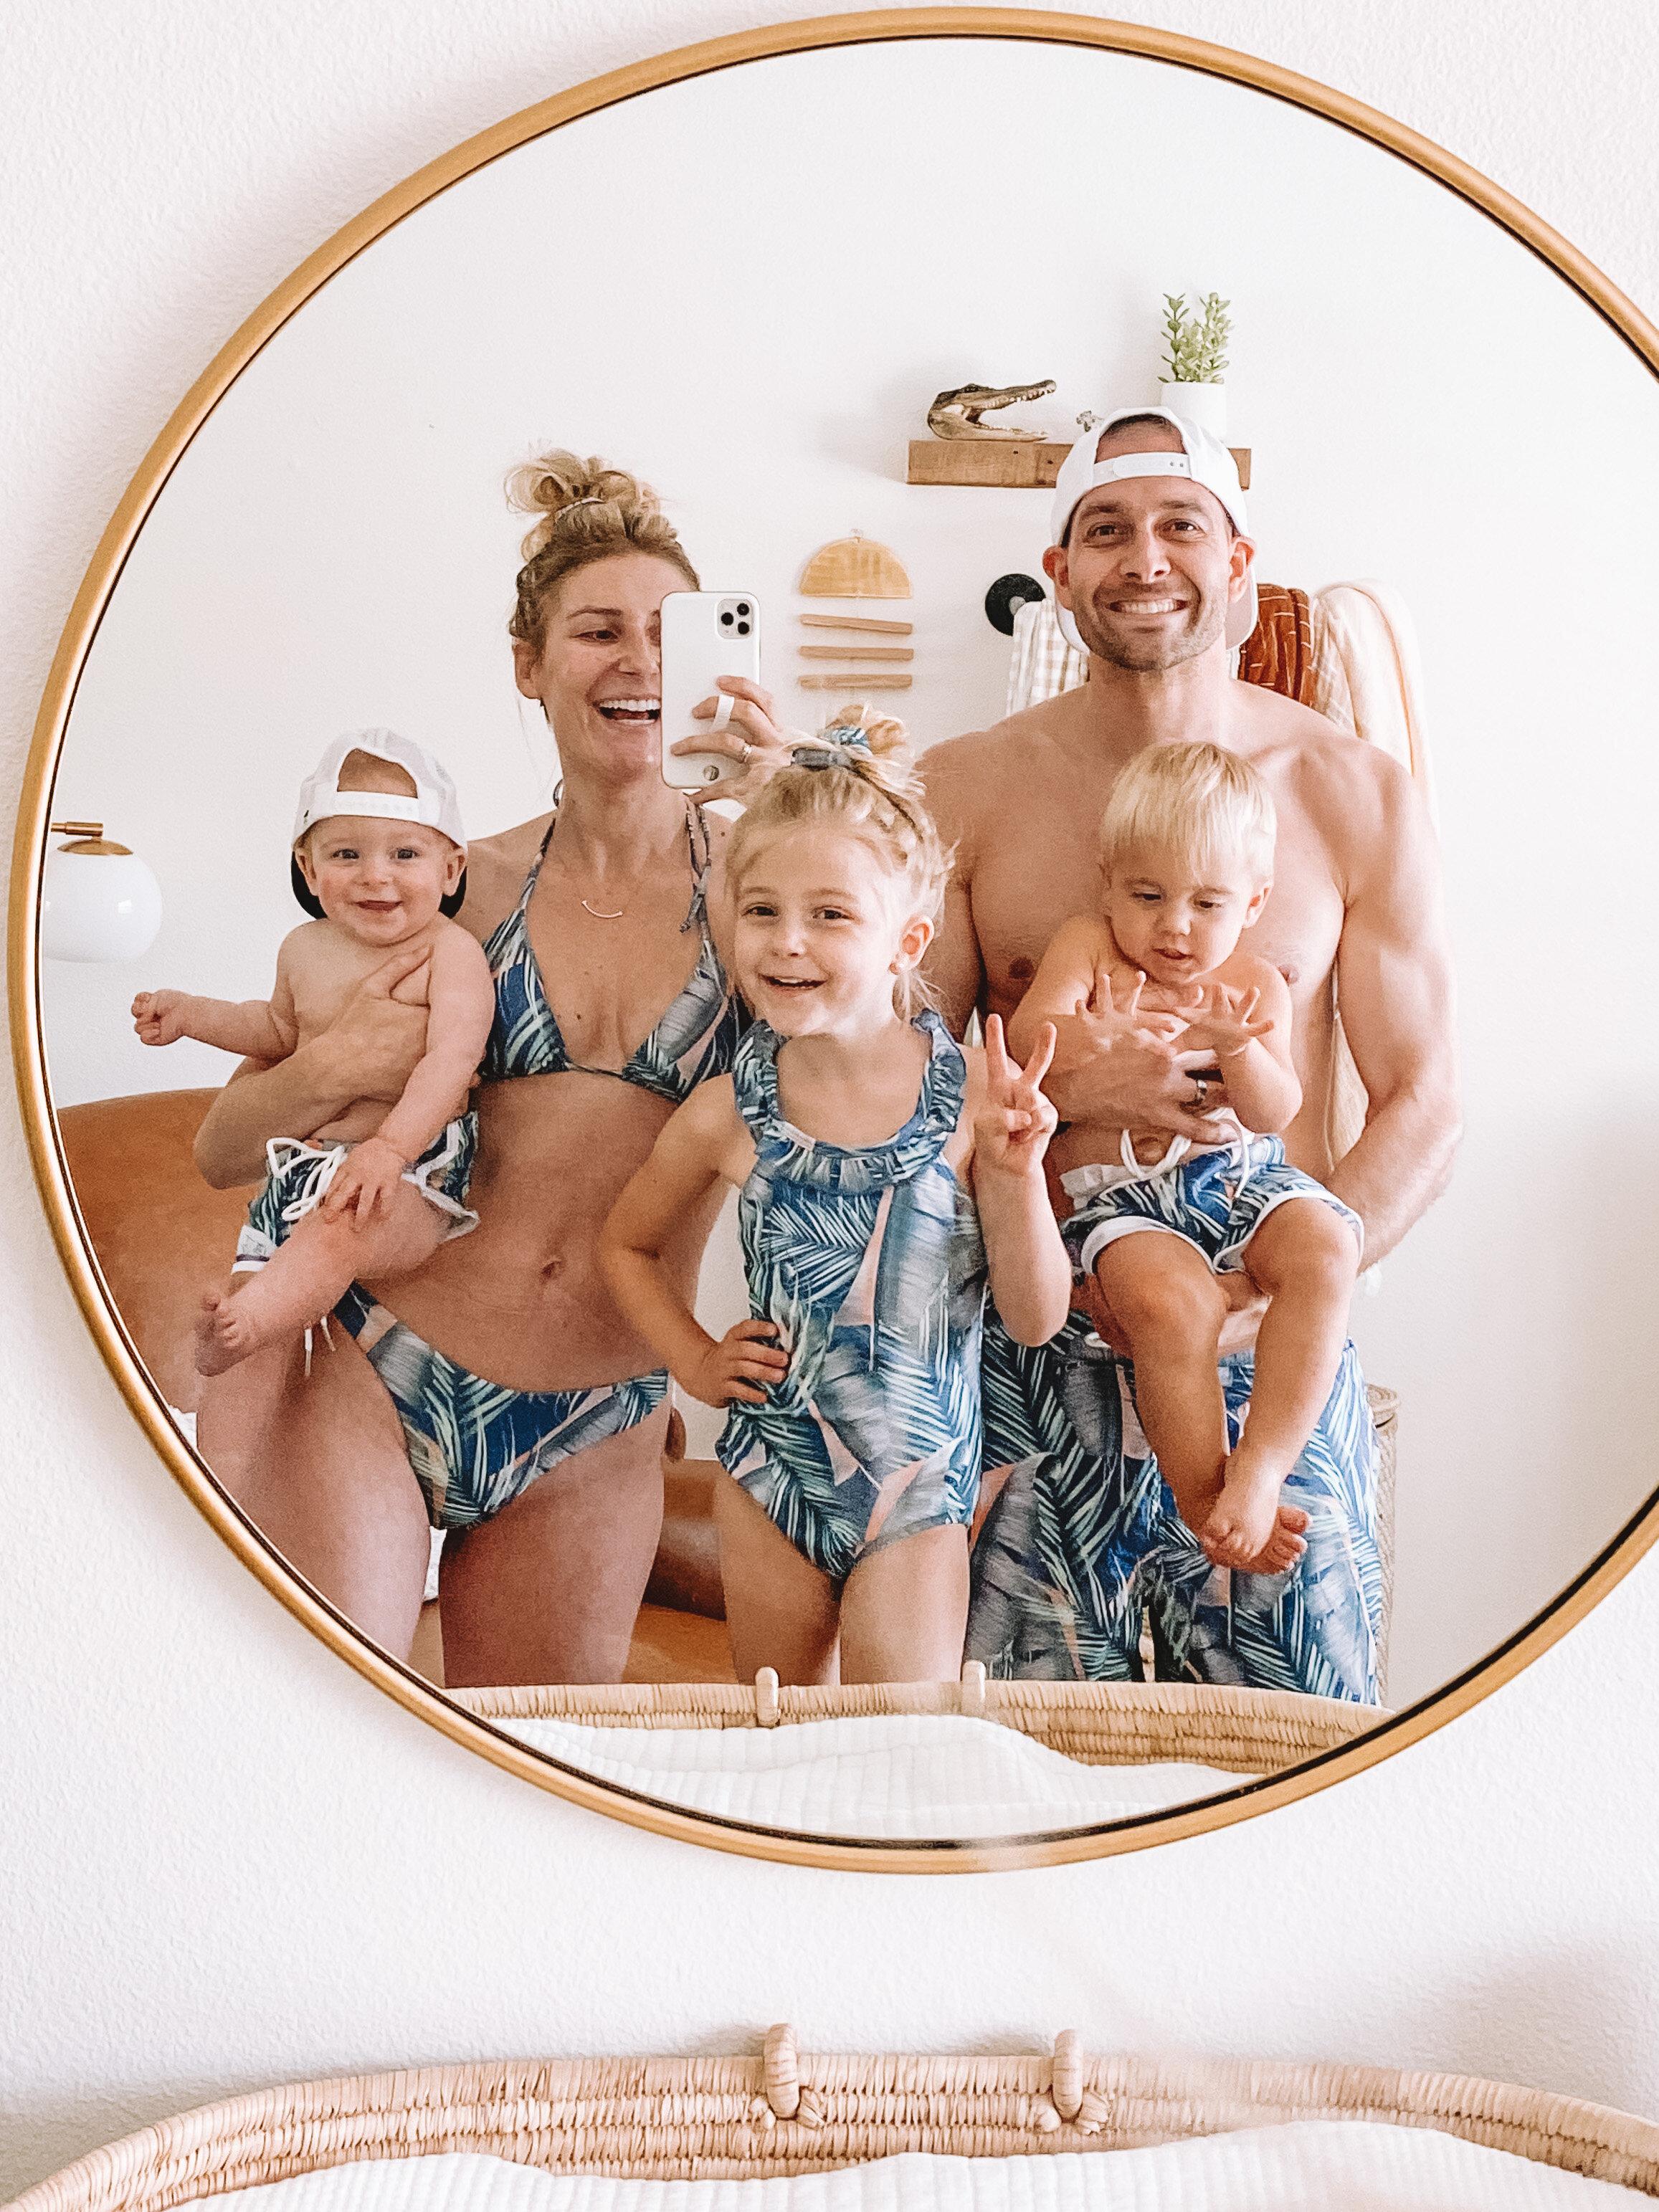 Matching Family Swimsuits - The Overwhelmed Mommy